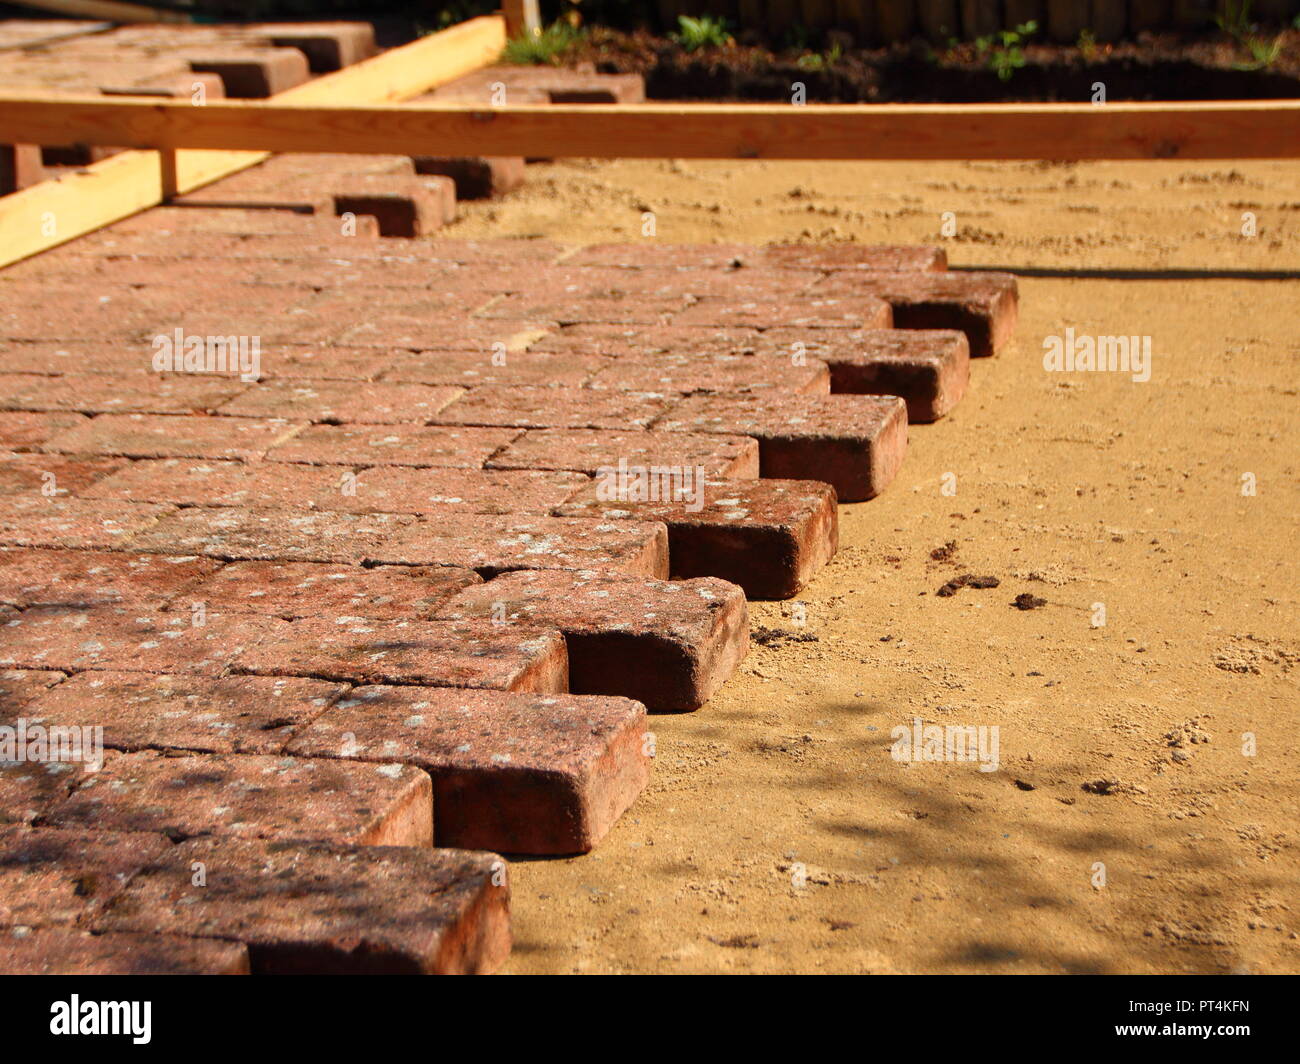 Building a Terrace with Red Outdoor Worn Tiles. Home renovation improvement. Stock Photo